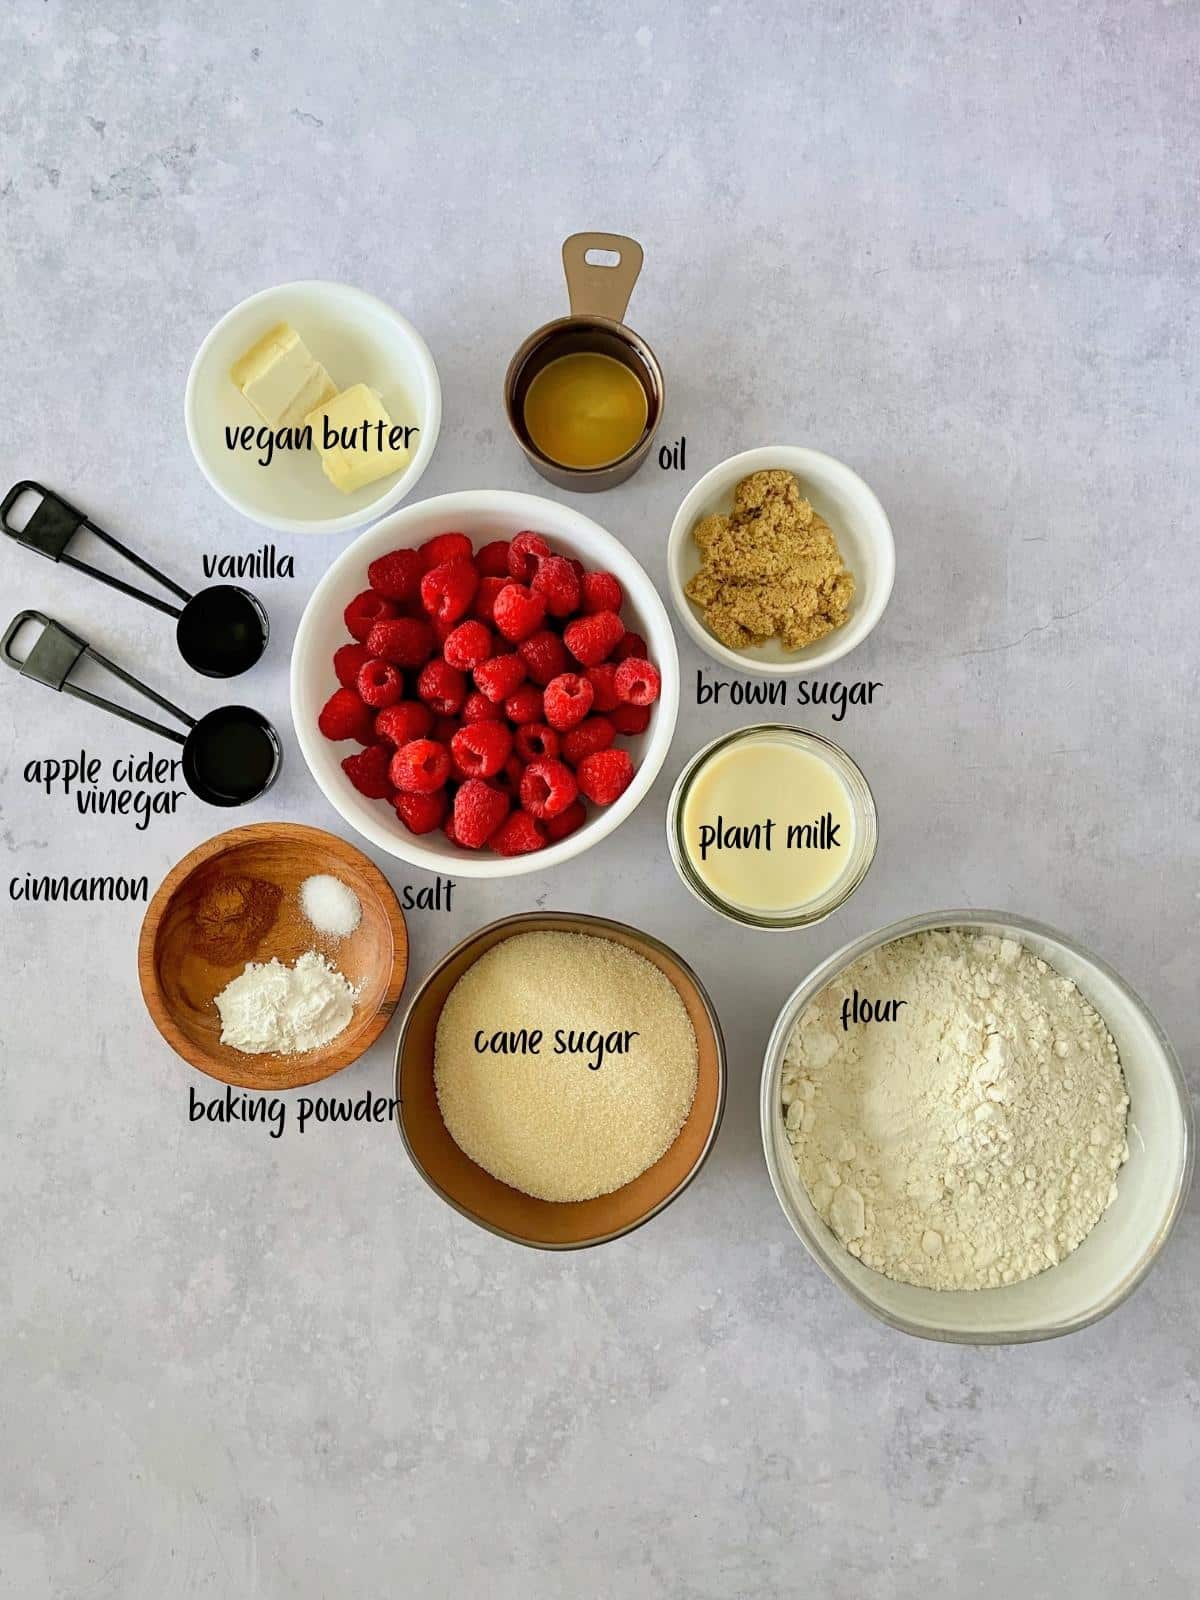 Labeled ingredients for raspberry muffins.